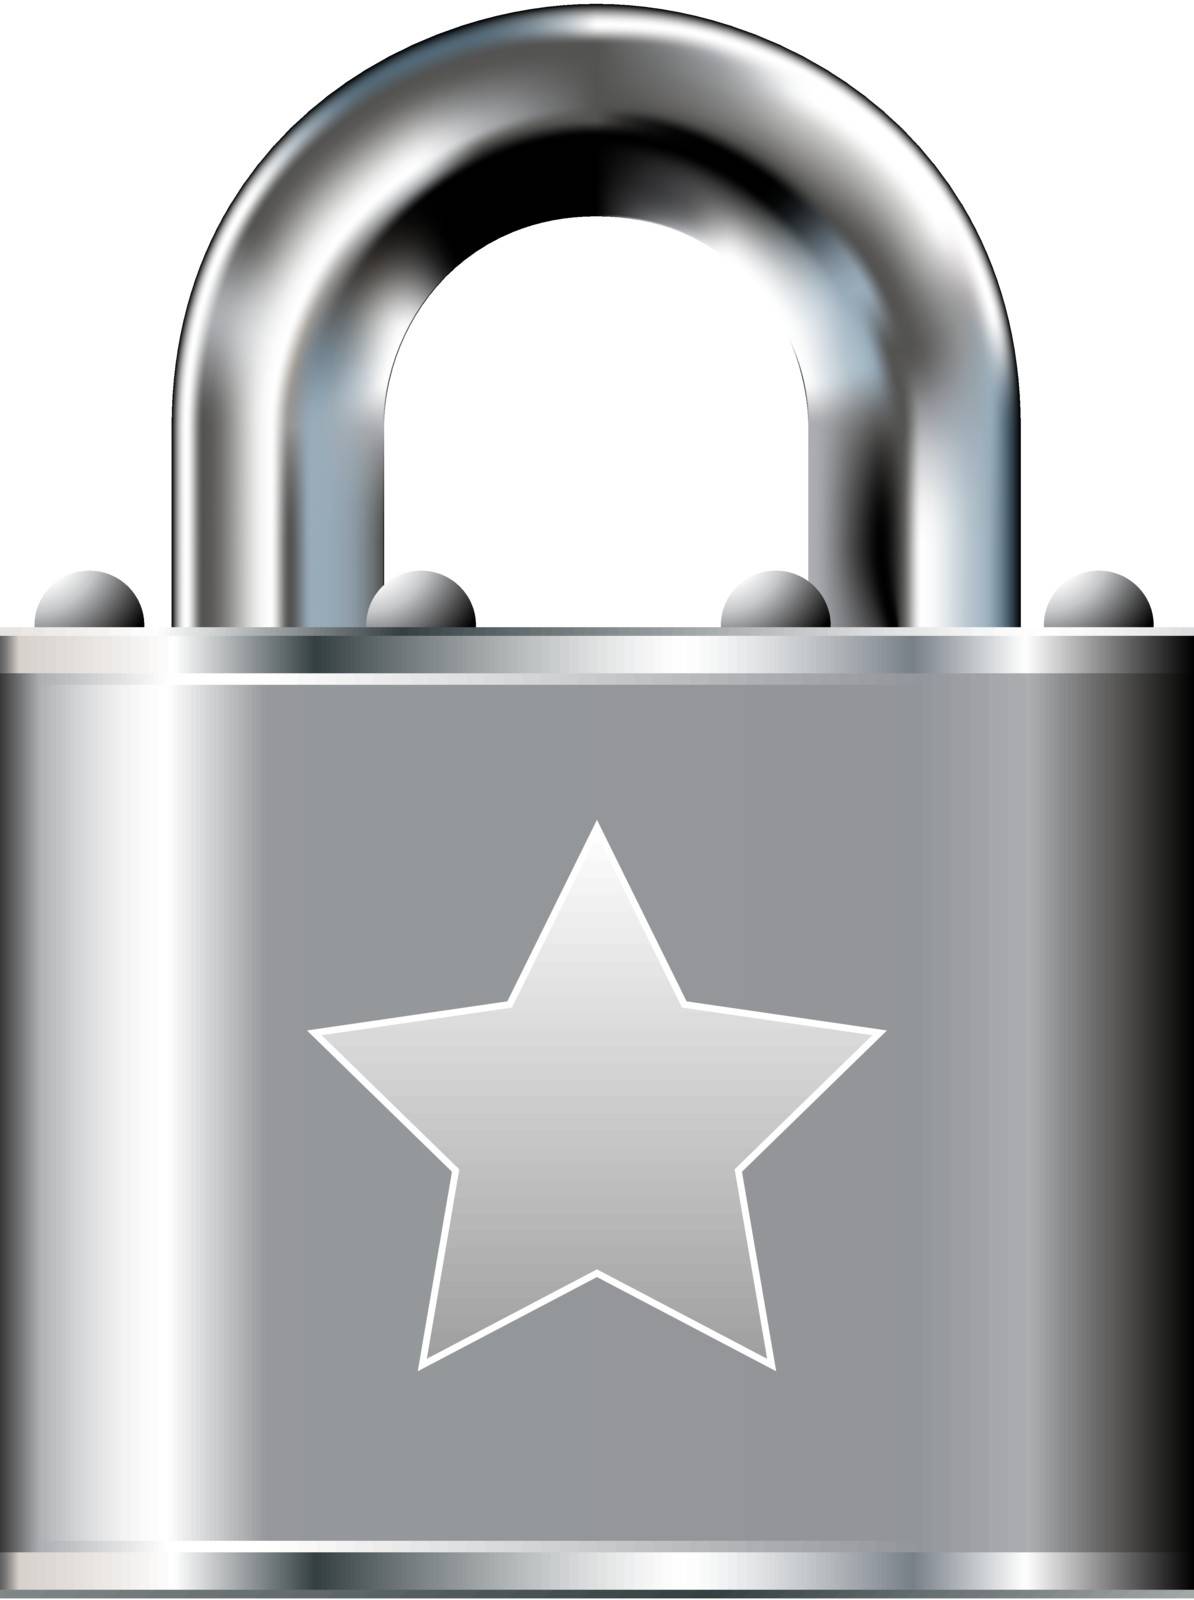 Secure favorites icon by lhfgraphics